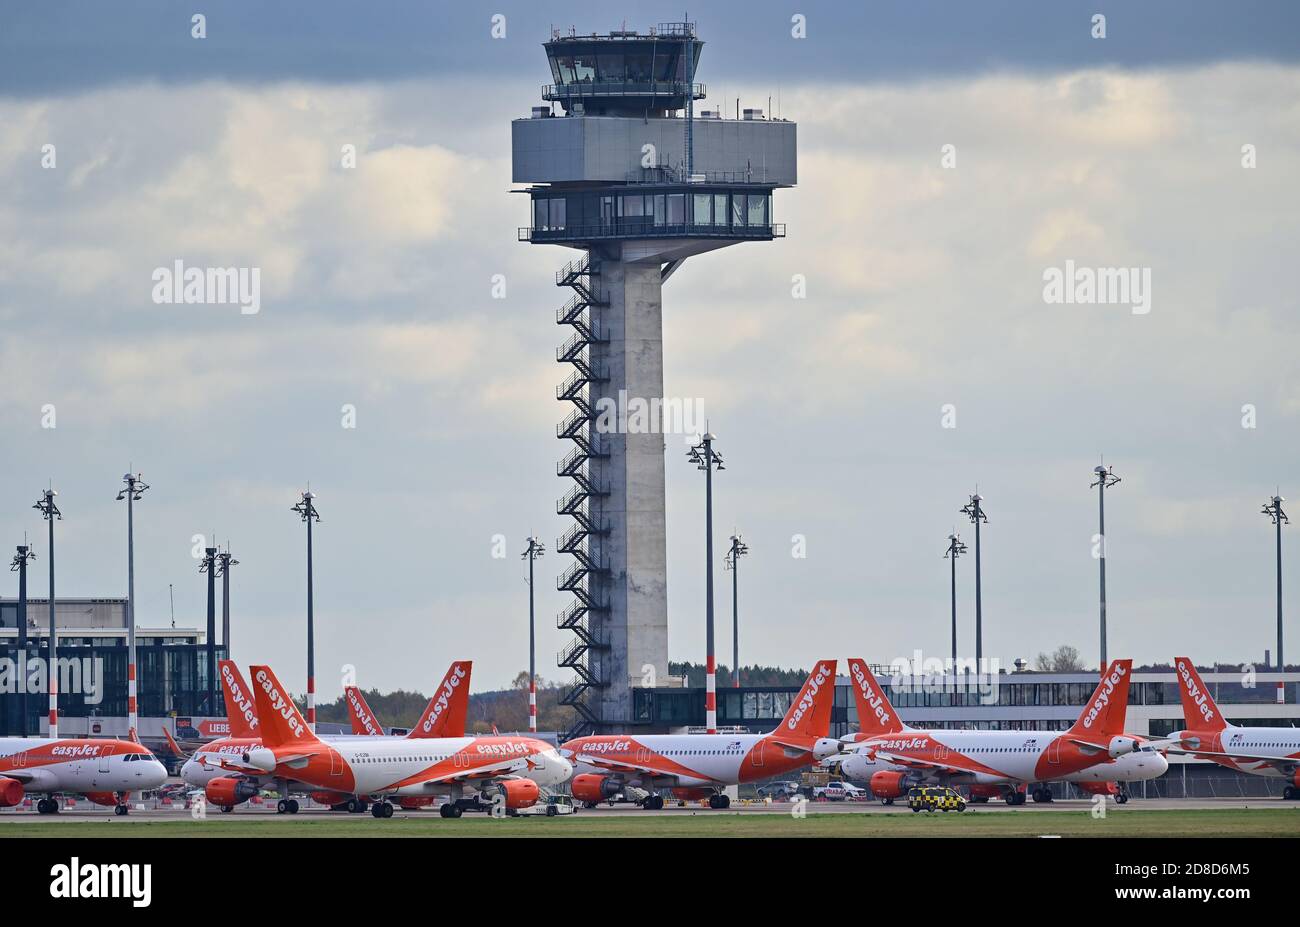 29 October 2020, Brandenburg, Schönefeld: Passenger aircraft of the British airline Easyjet are parked on the apron at Terminal 1 of the Capital Airport Berlin Brandenburg 'Willy Brandt' (BER). The opening of BER Airport is planned for 31.10.2020. Photo: Patrick Pleul/dpa-Zentralbild/dpa Stock Photo